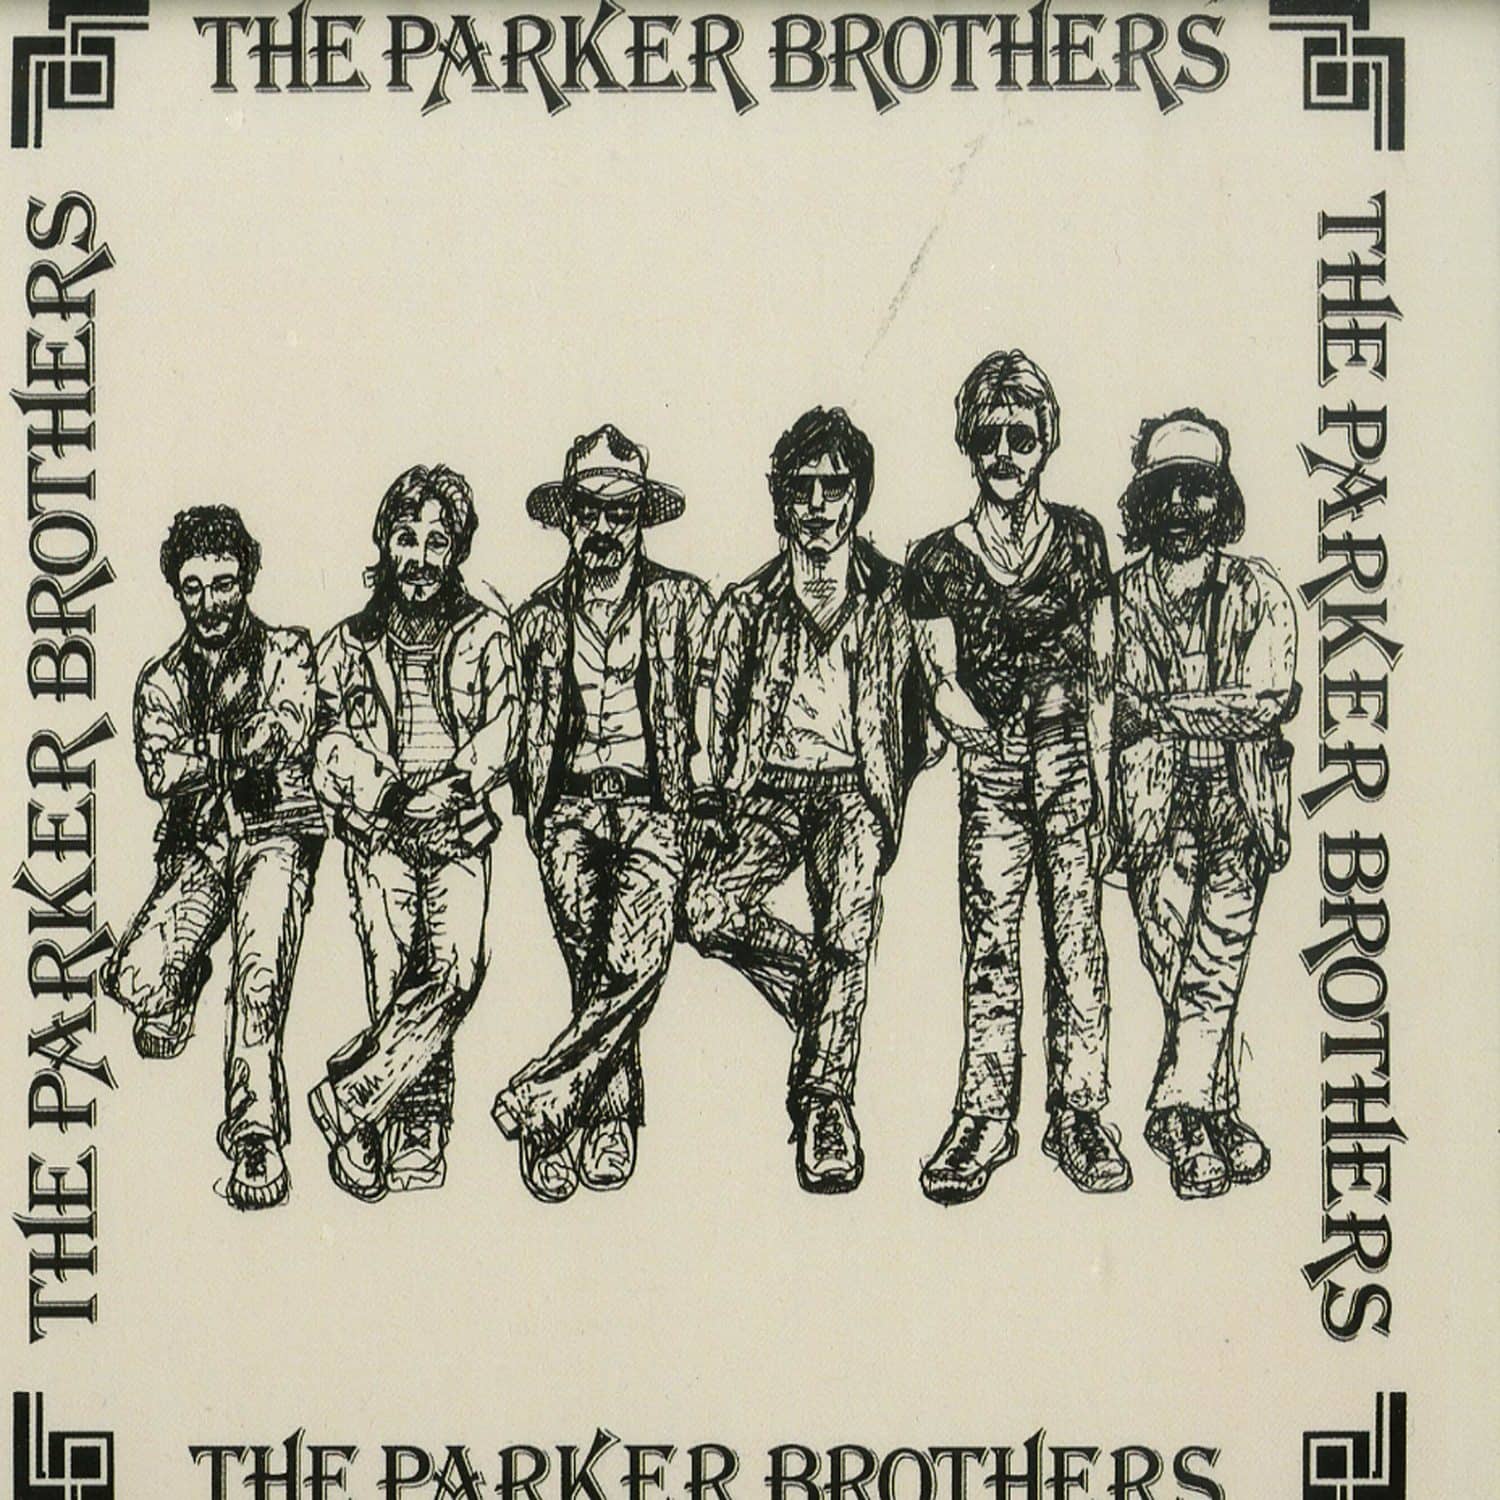 The Parker Brothers - THE PARKER BROTHERS 